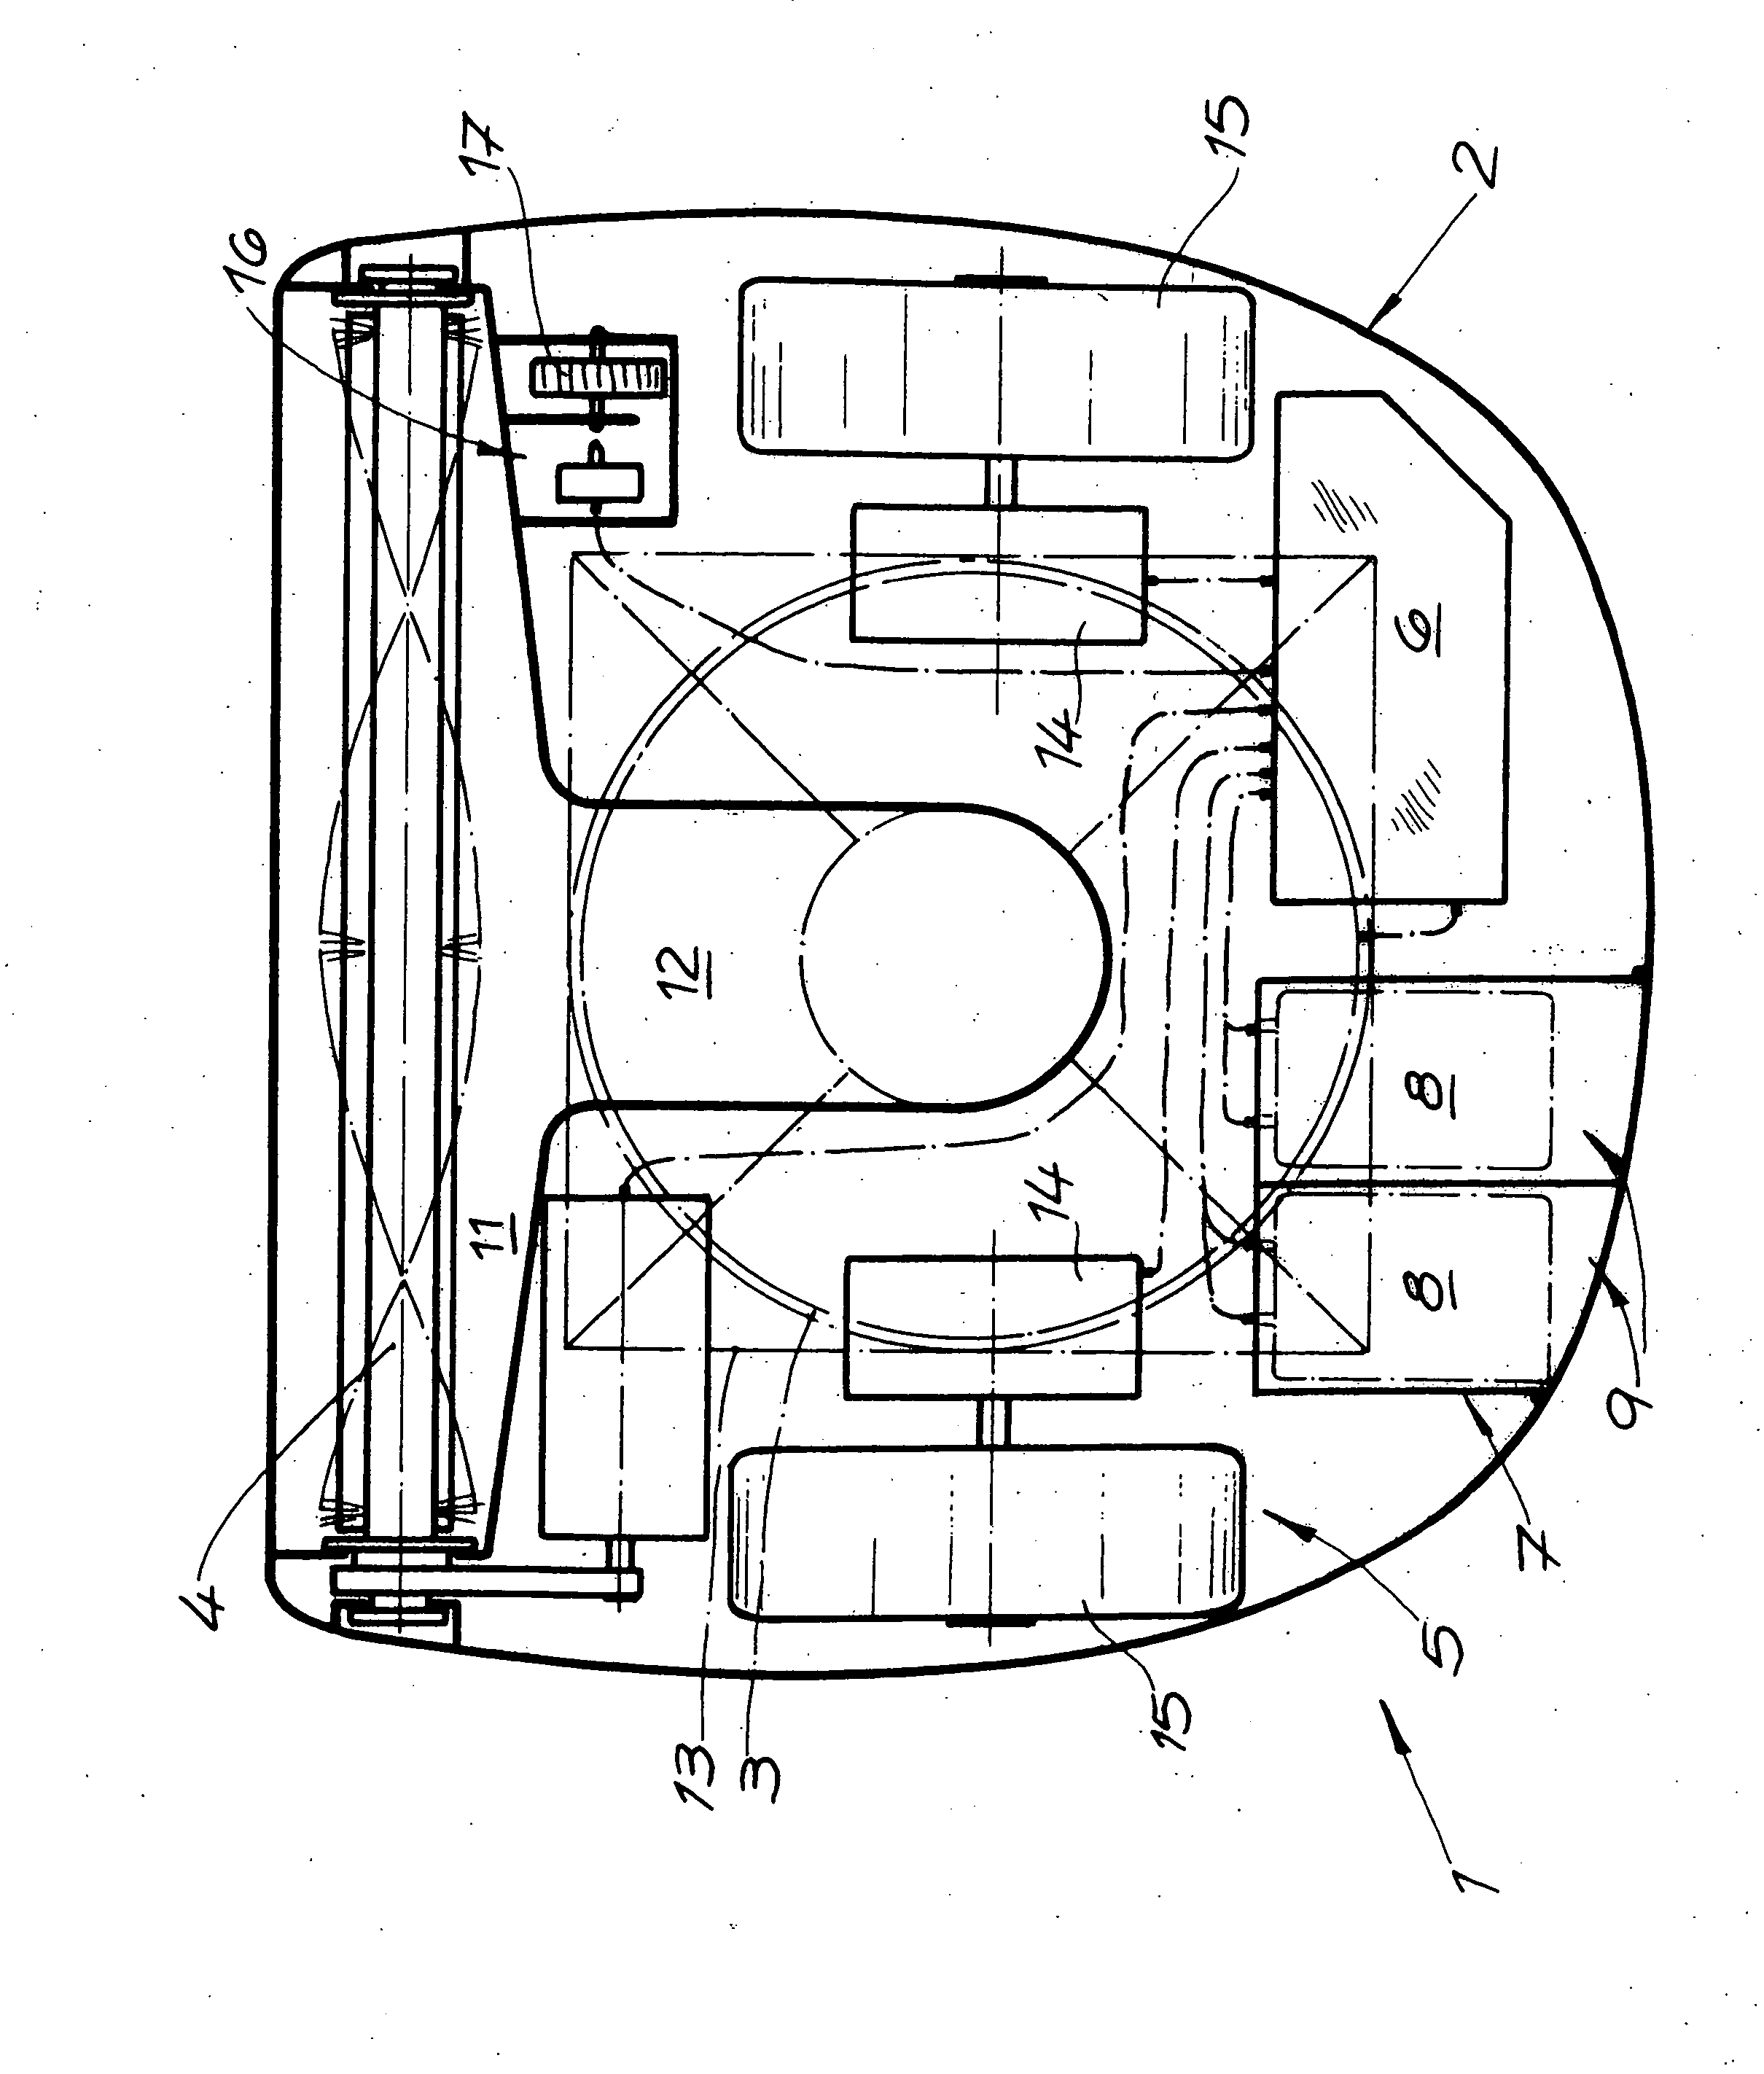 Self-propelled vacuum-cleaning device